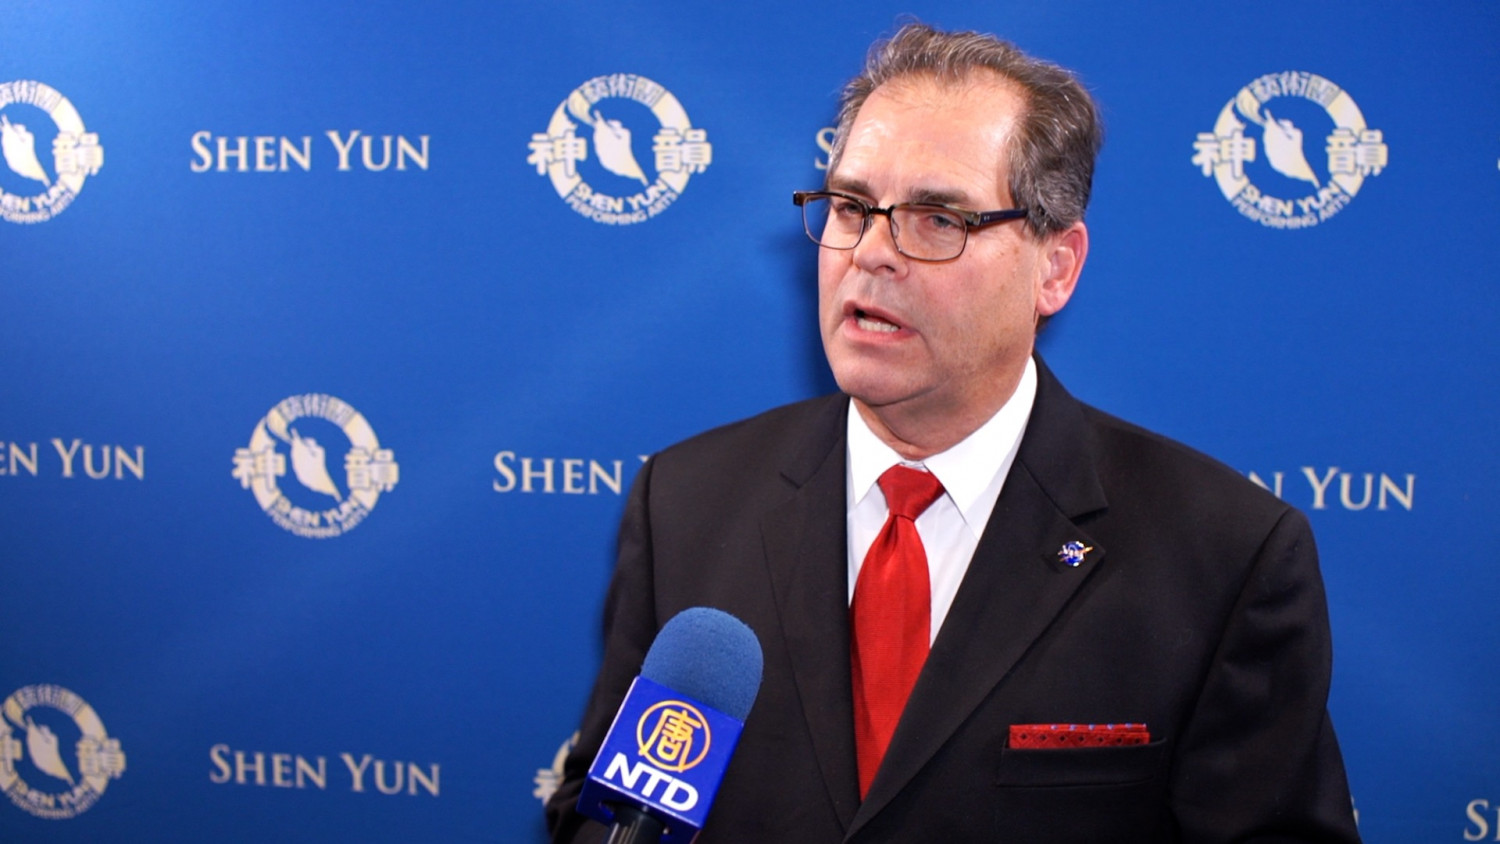 Television and Radio Hosts Expresses Appreciation for Shen Yun’s Spirituality